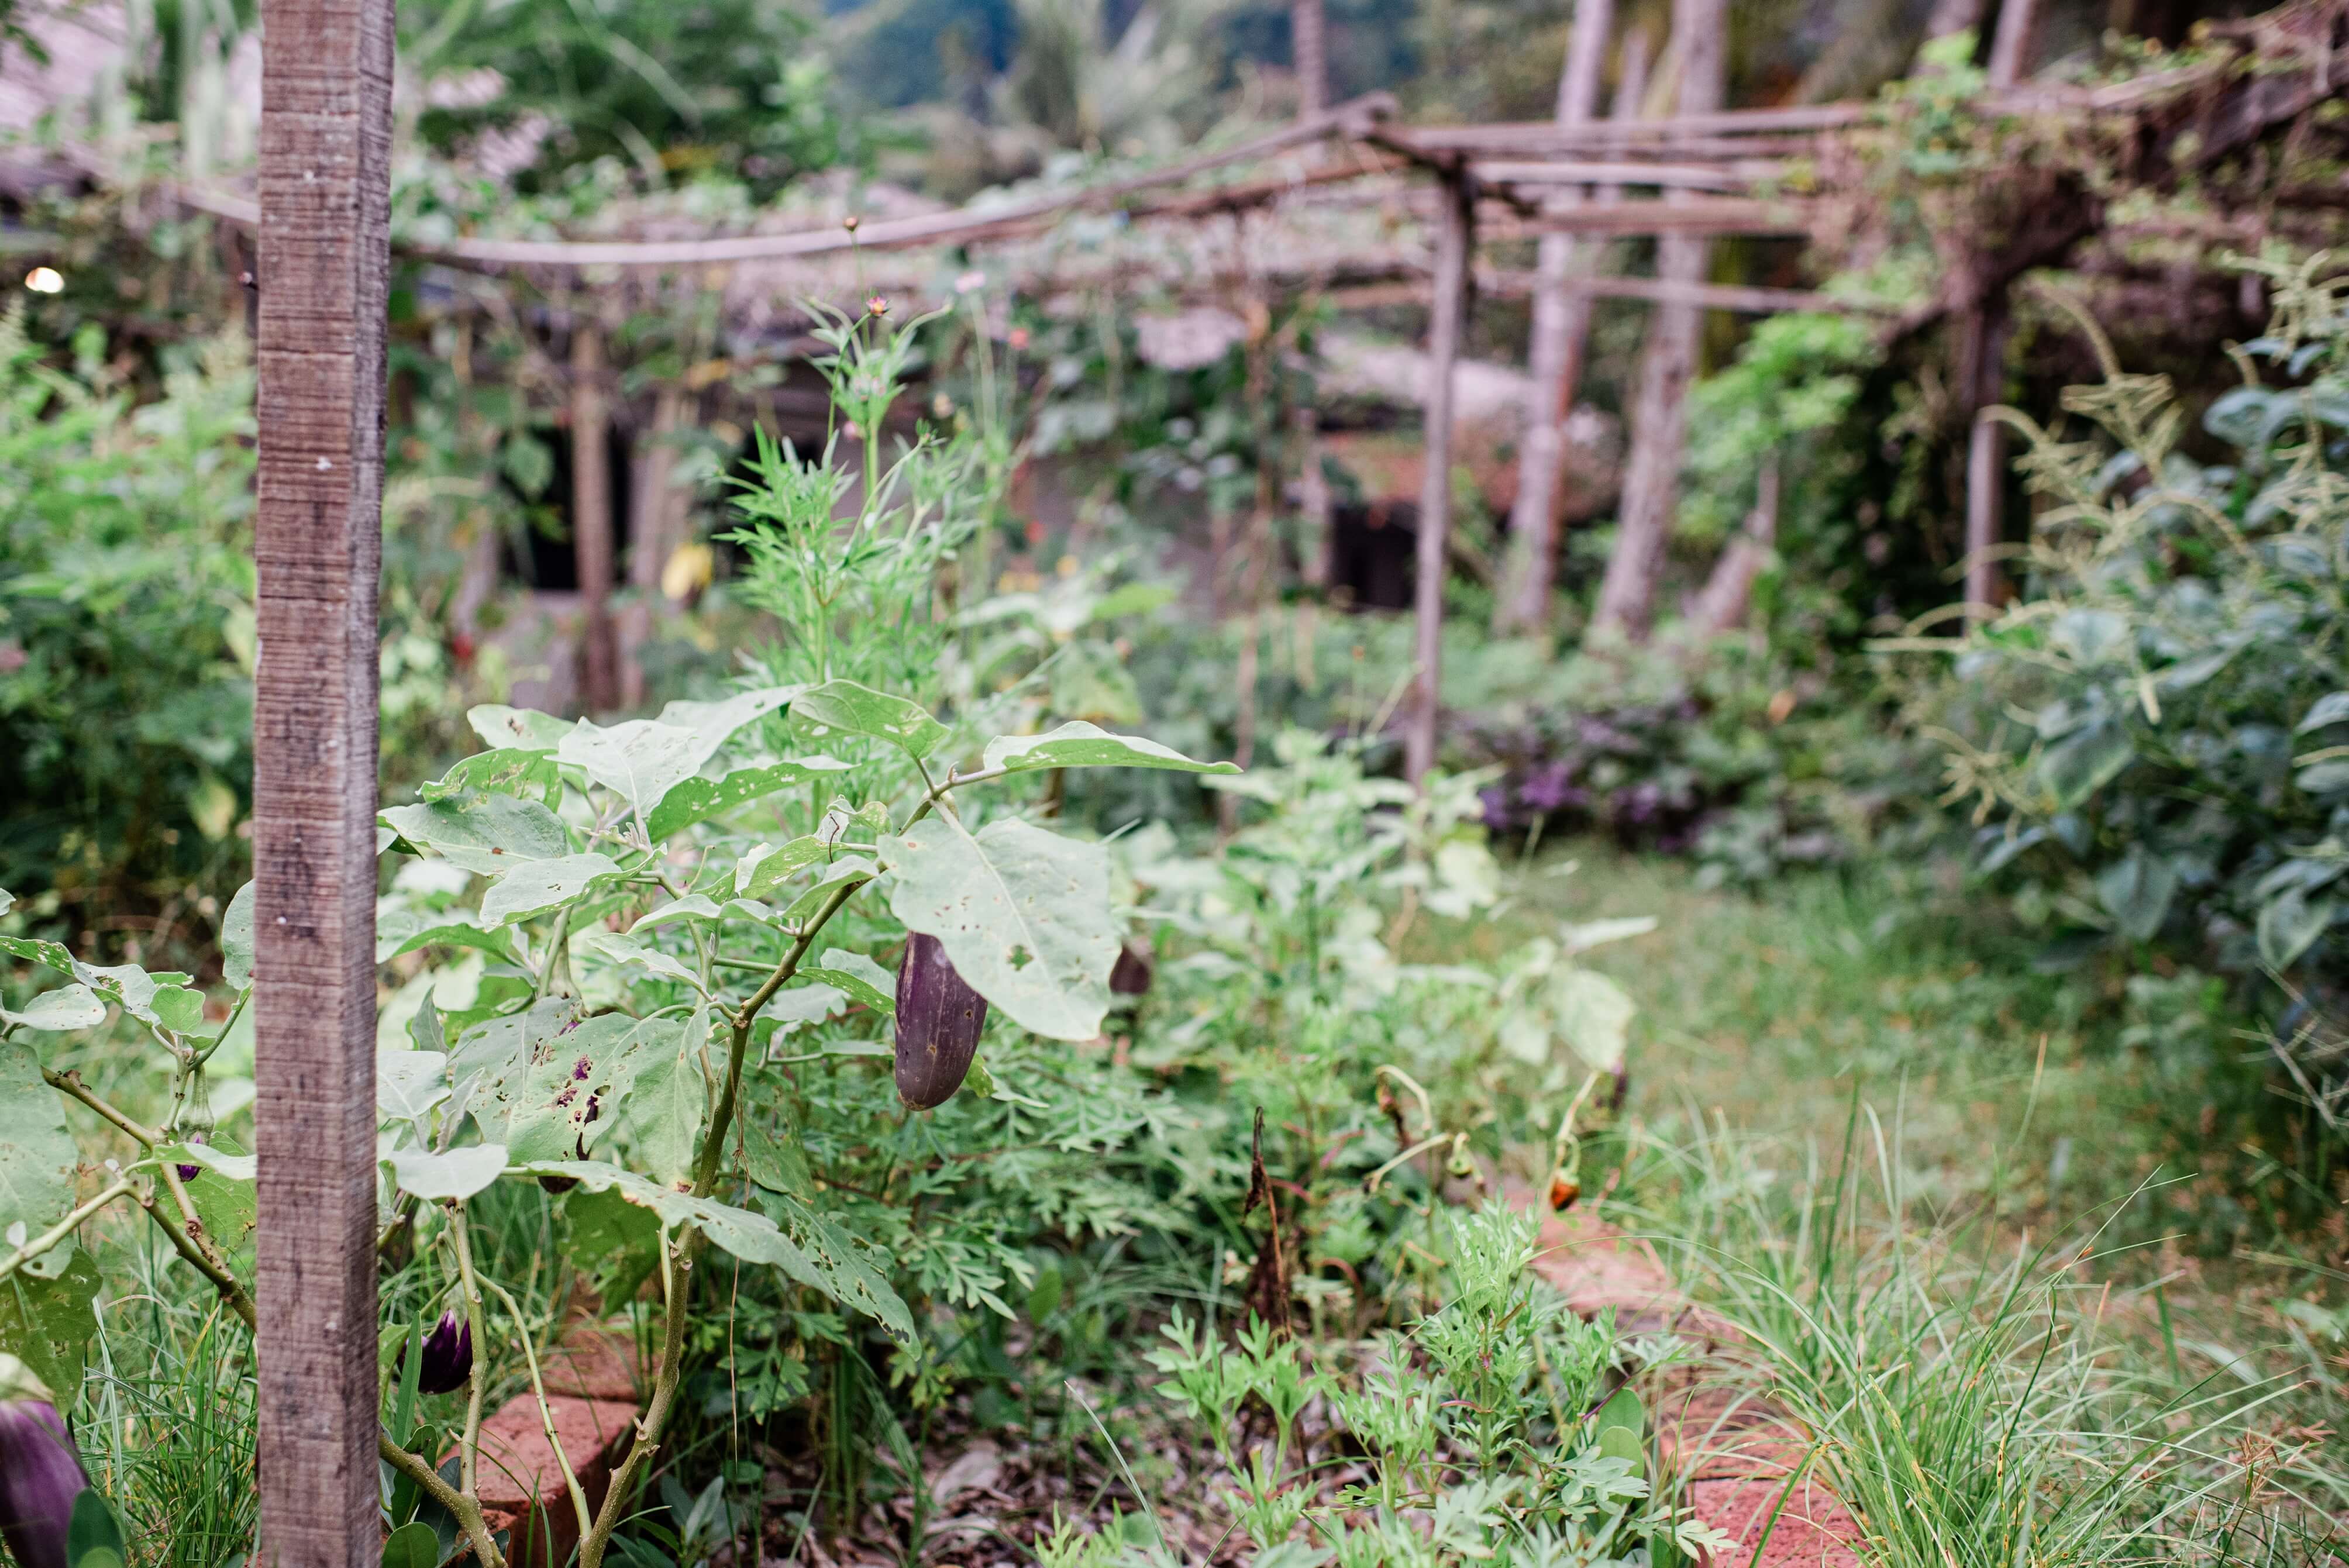 The resort has been steadily increasing its use of solar power and has started a small farm and plant nursery, from which some of its food is sourced. Photo by Kenny Ng 